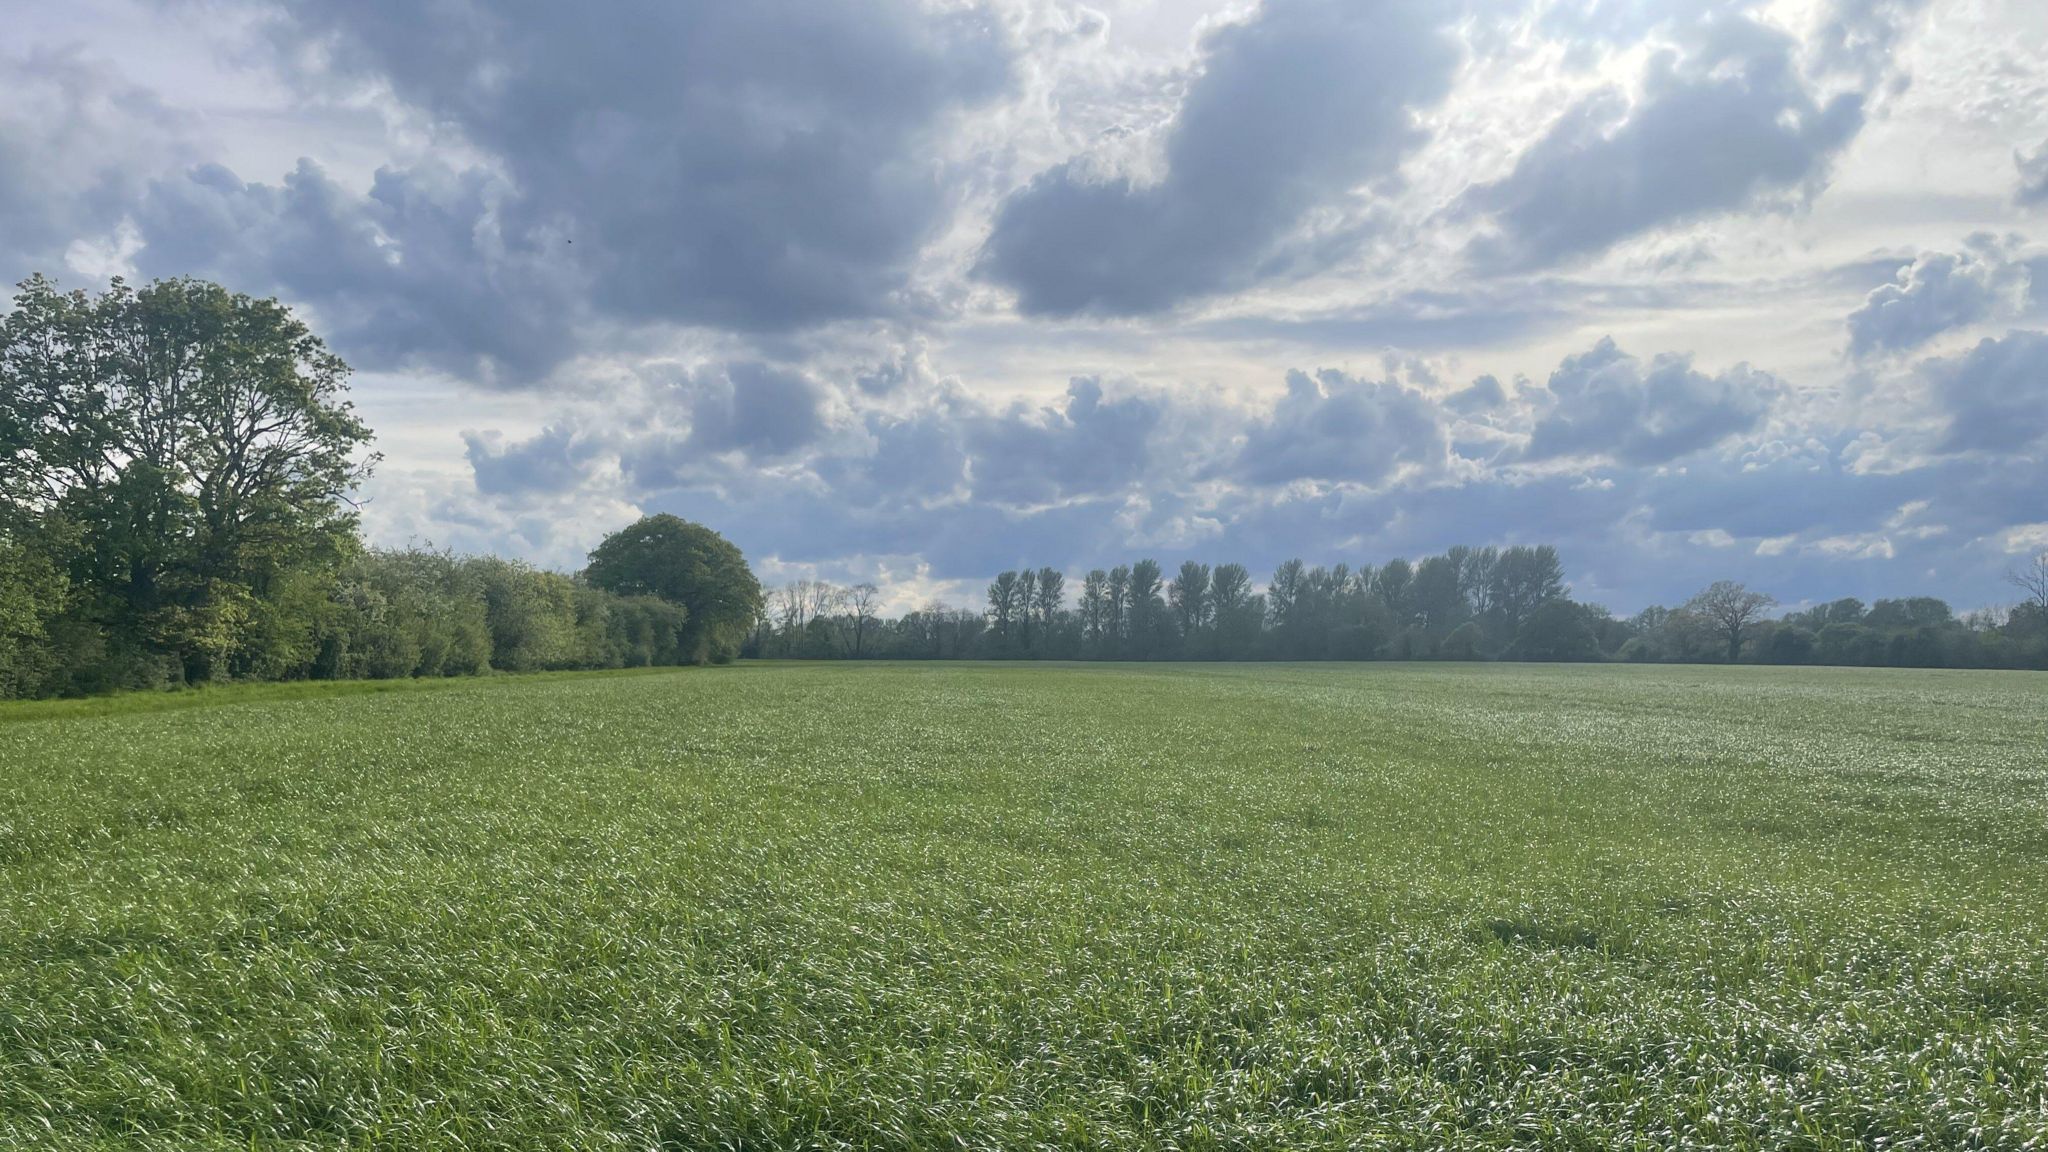 A lush green field with trees in the background where we can see blue sky with clouds